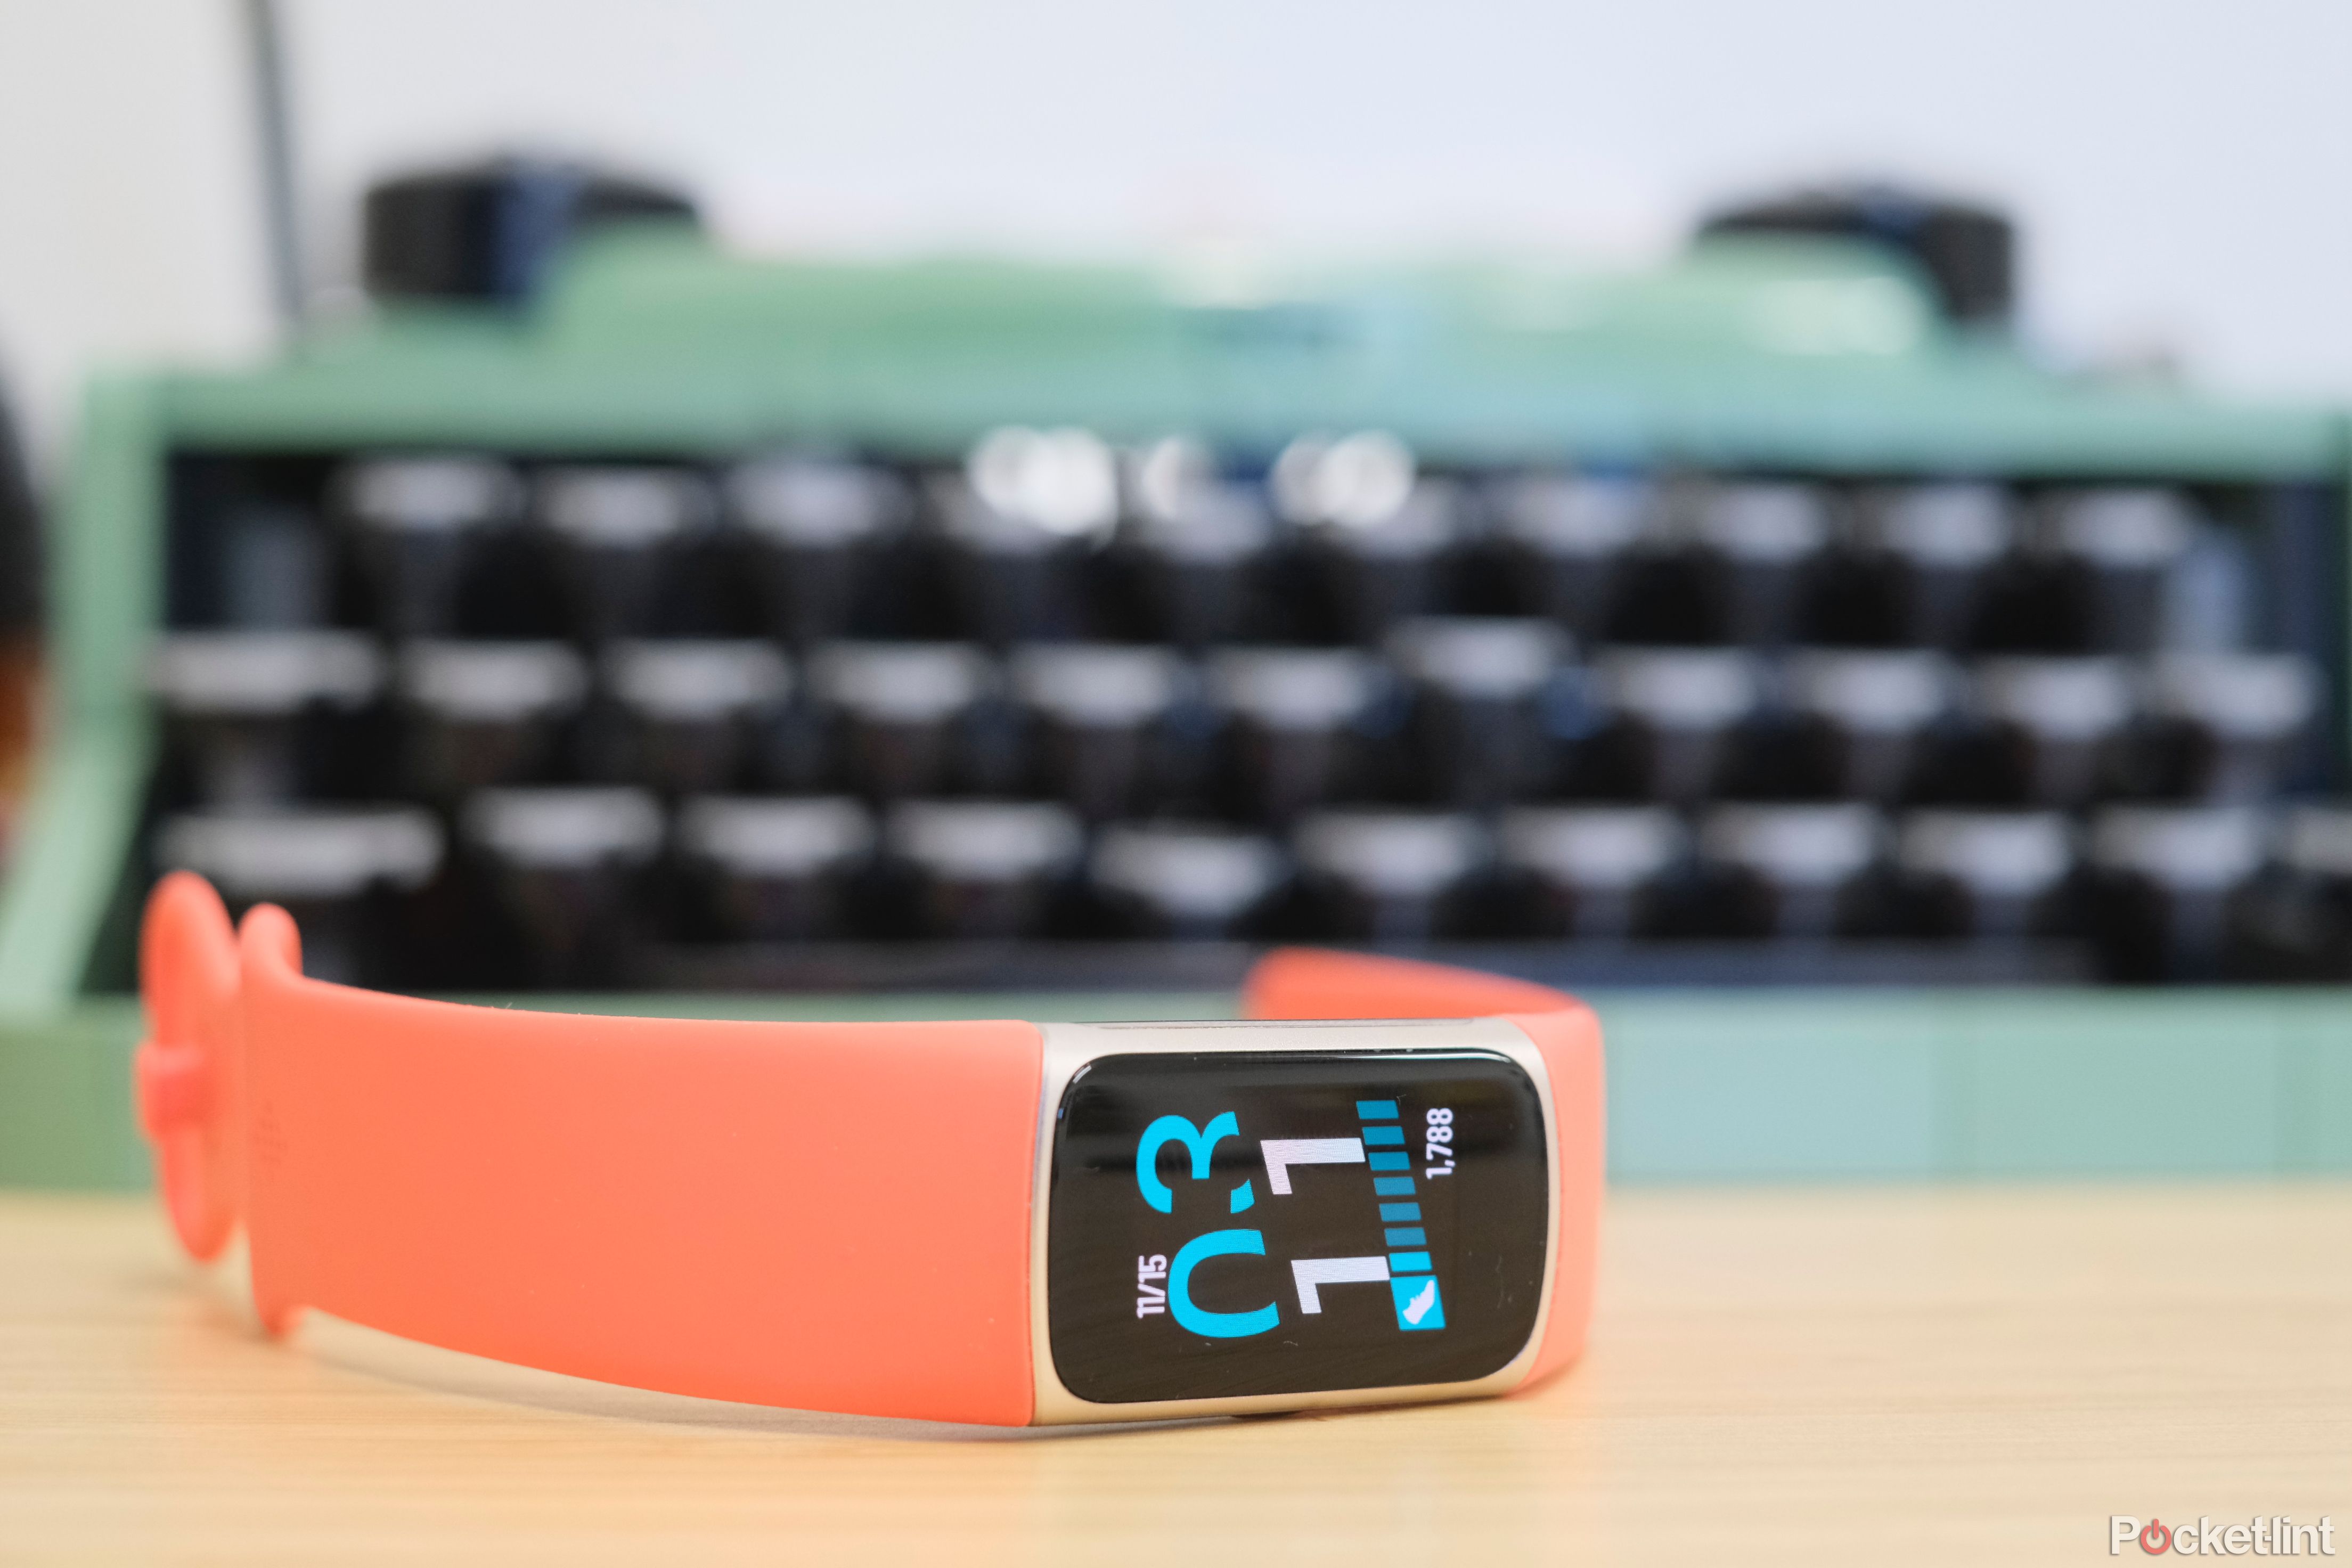 Living With the Fitbit Charge 6 - Video - CNET